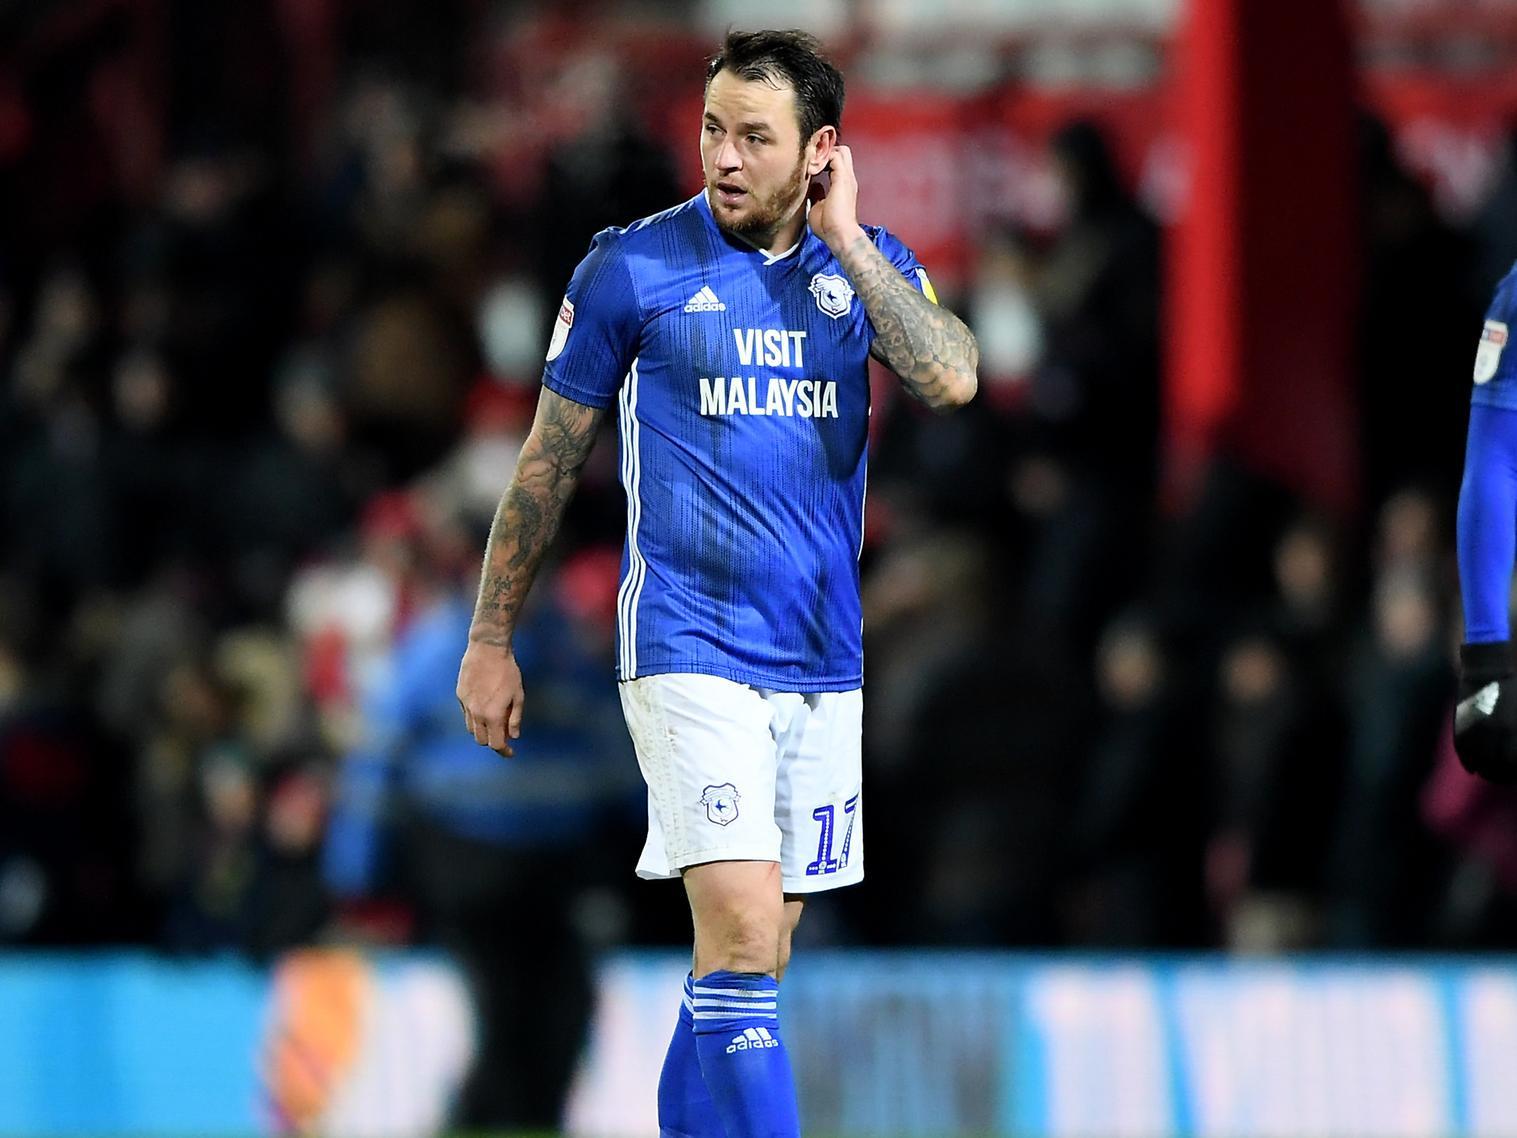 Lee Tomlin (Cardiff City) - a slow start at Elland Road but a driving force behind a stunning comeback for the Bluebirds. Produced a wonderful assist for the leveller, too.